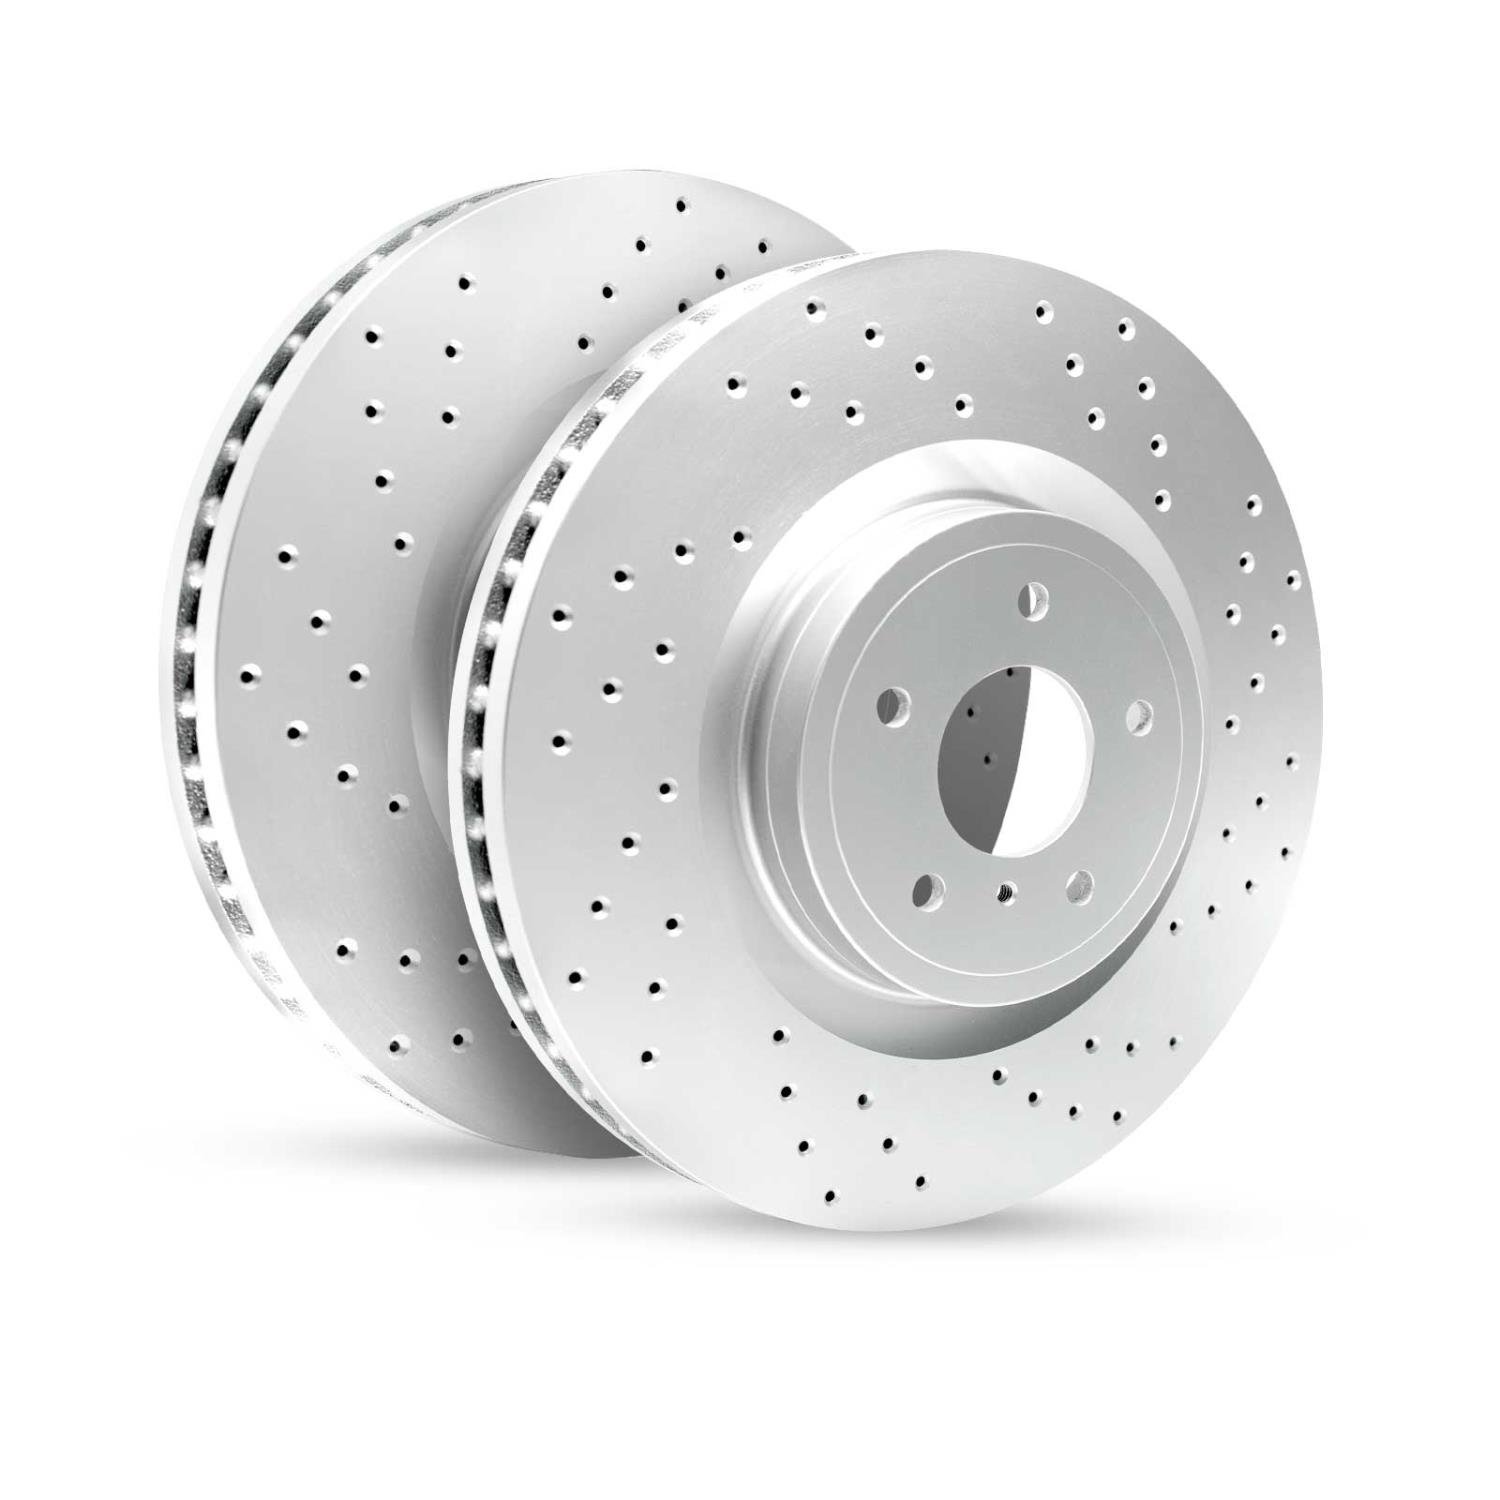 GEO-Carbon Drilled/Slotted Rotors, 2003-2005 Land Rover,